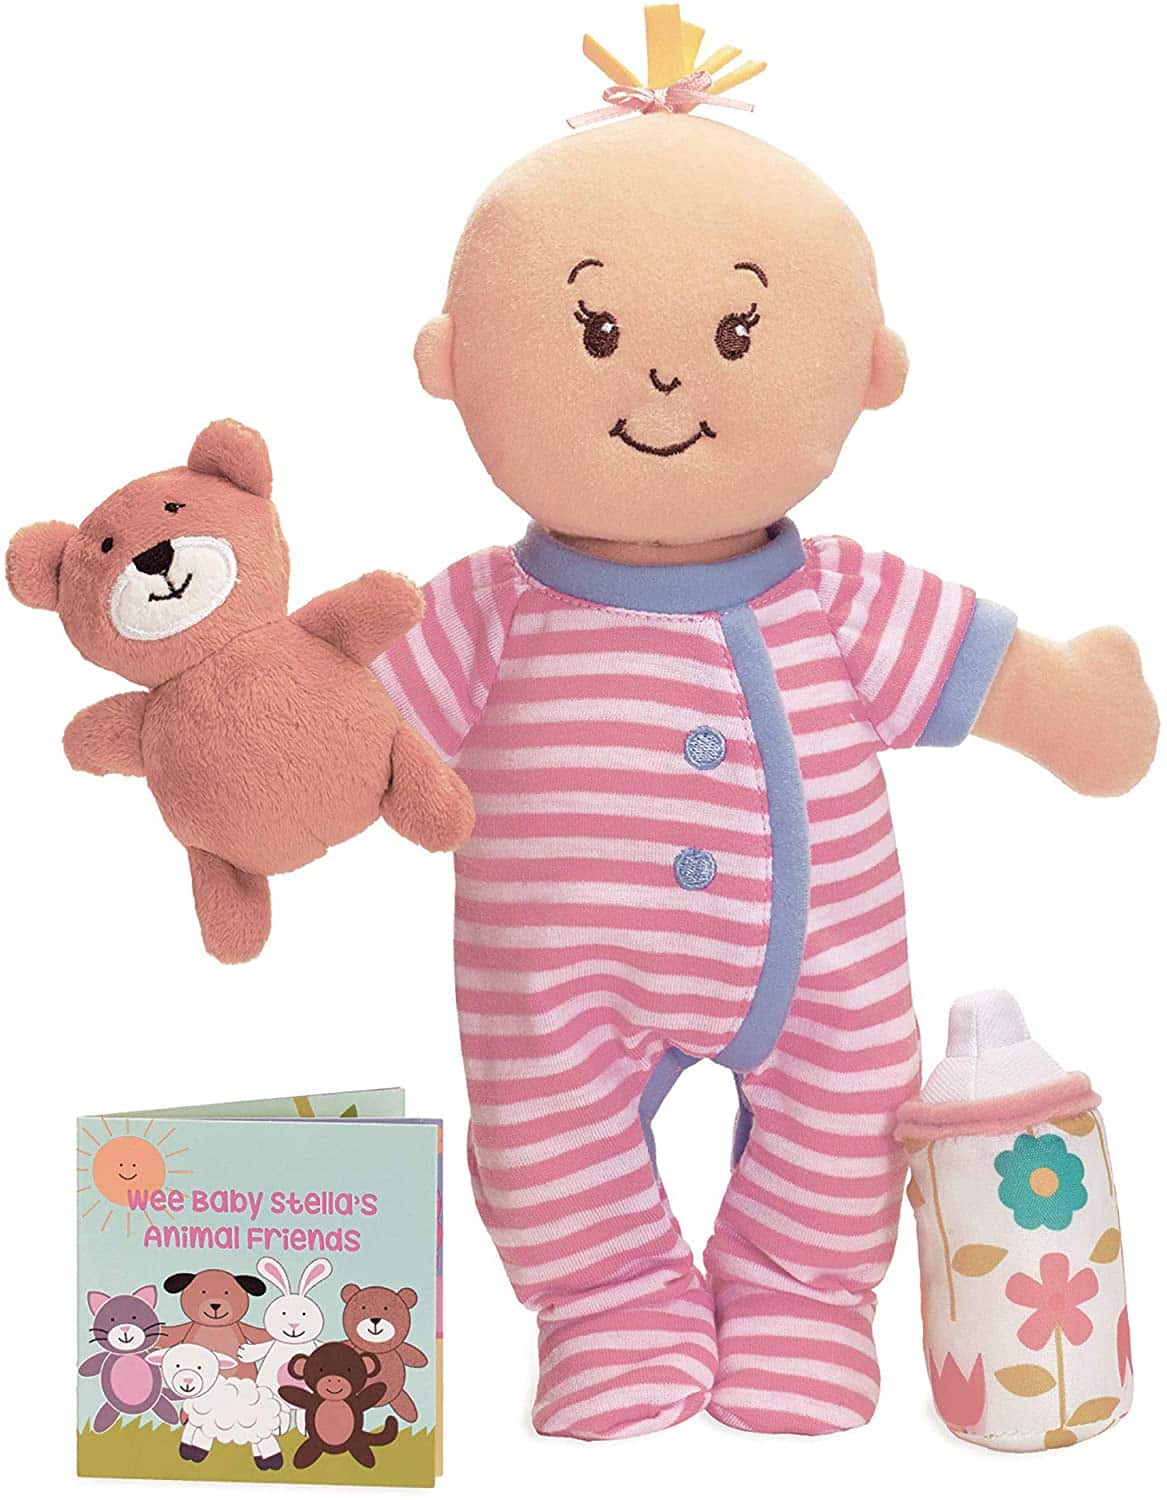 Doll wearing striped pajamas and holding teddy bear